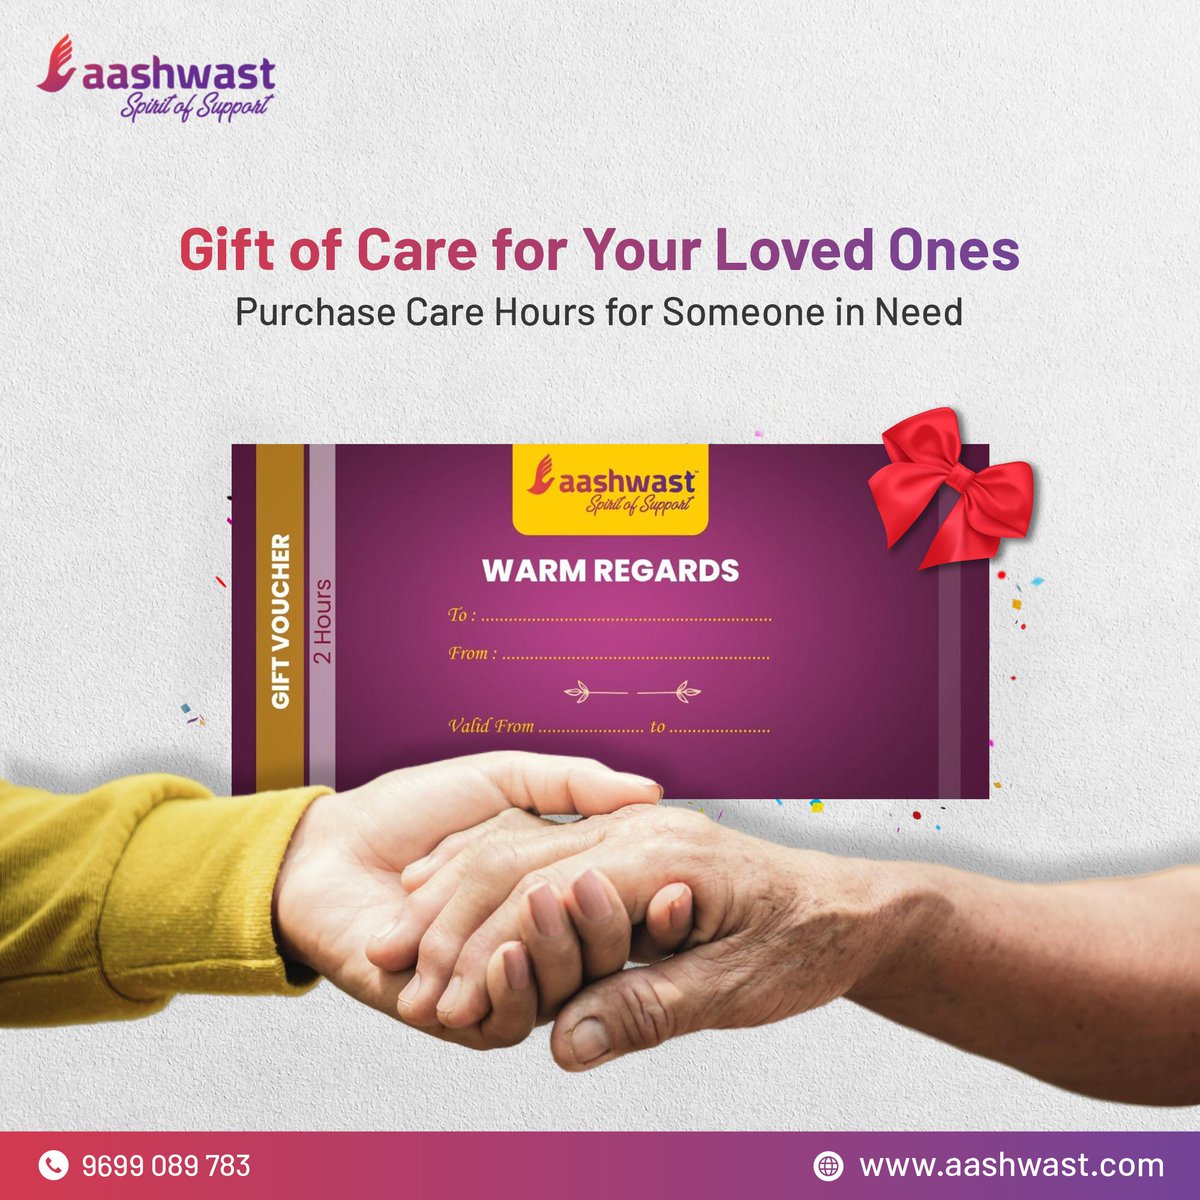 Gift of love and care for the ones you love and care. Purchase your Aashwast Gift Card today!
#giftofcare #aashwastgiftcard #aashwastcare #aashwastpune #seniorcare #seniorcarepune #oldagecare #elderlycare #giftoflove #carehours #aashwast